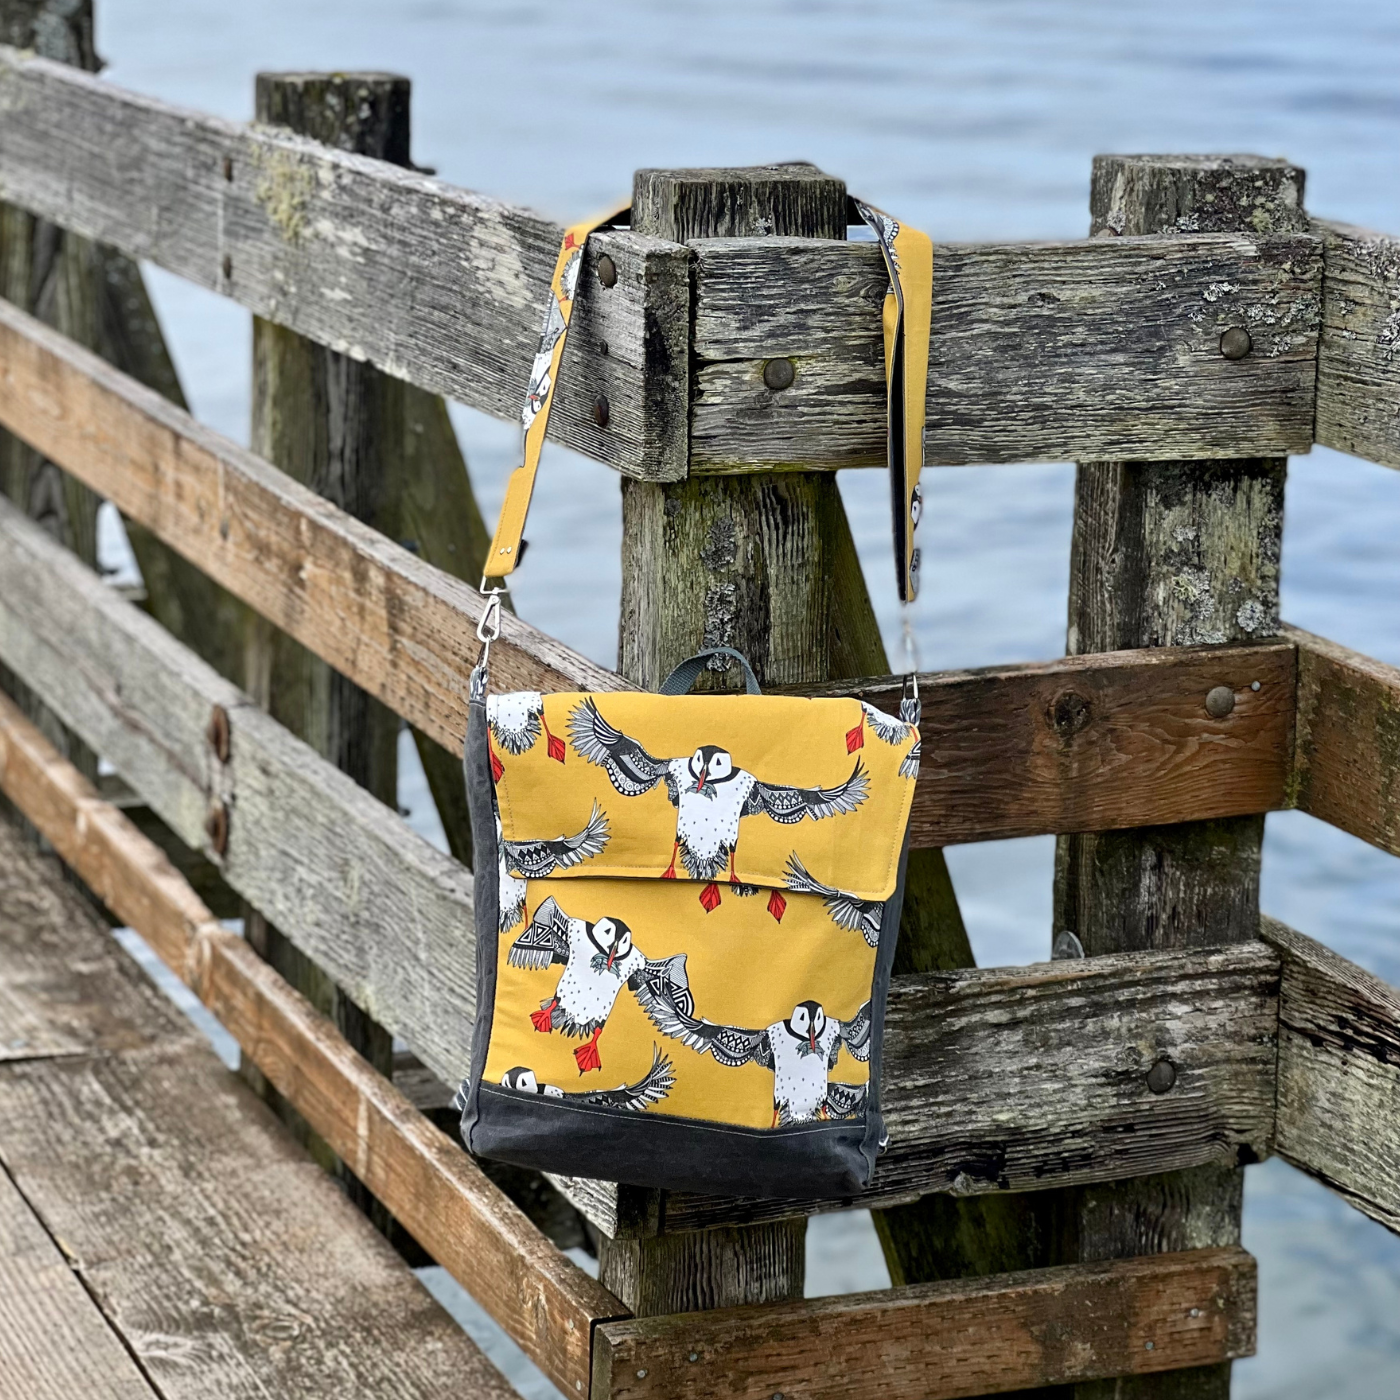 A handmade rectangular bag with a fish design (with a yellow background and rows of large white puffins with black-and-white wings outstretched and orange feet) hangs against a brown slatted fence on the edge of a pier overlooking the ocean. The bag has a top flap that closes in the top third.